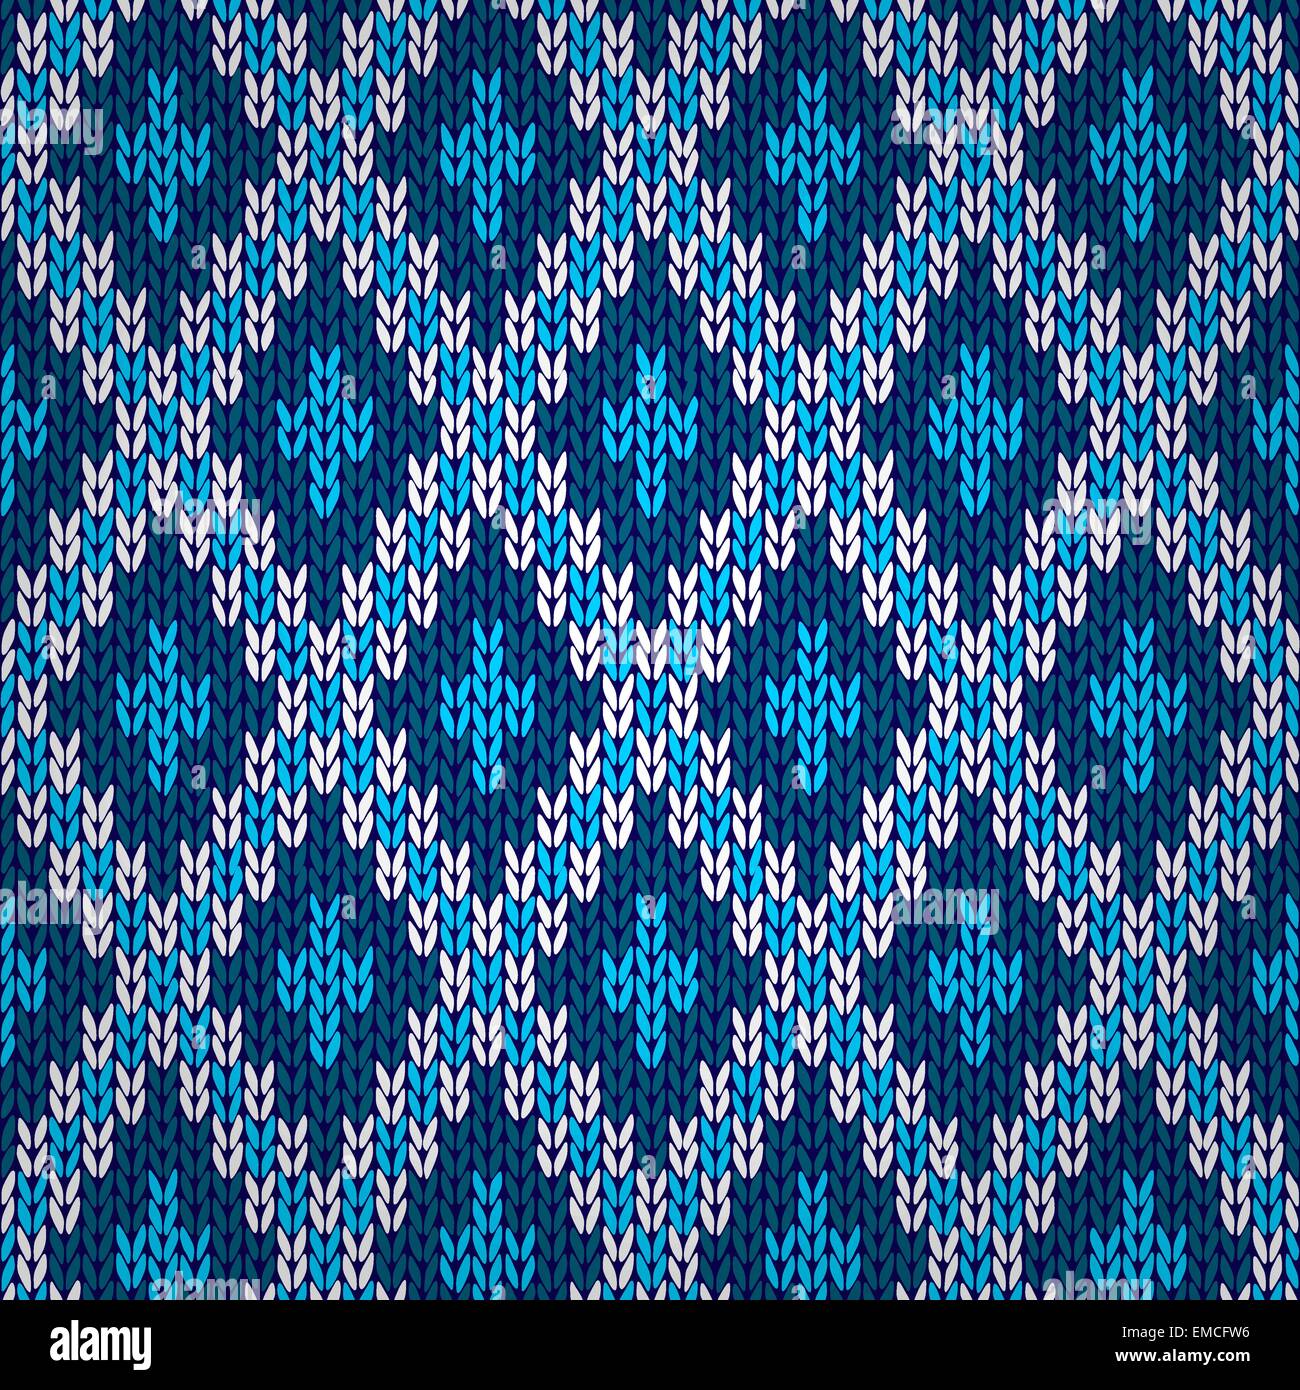 Seamless blue knitted pattern Stock Vector